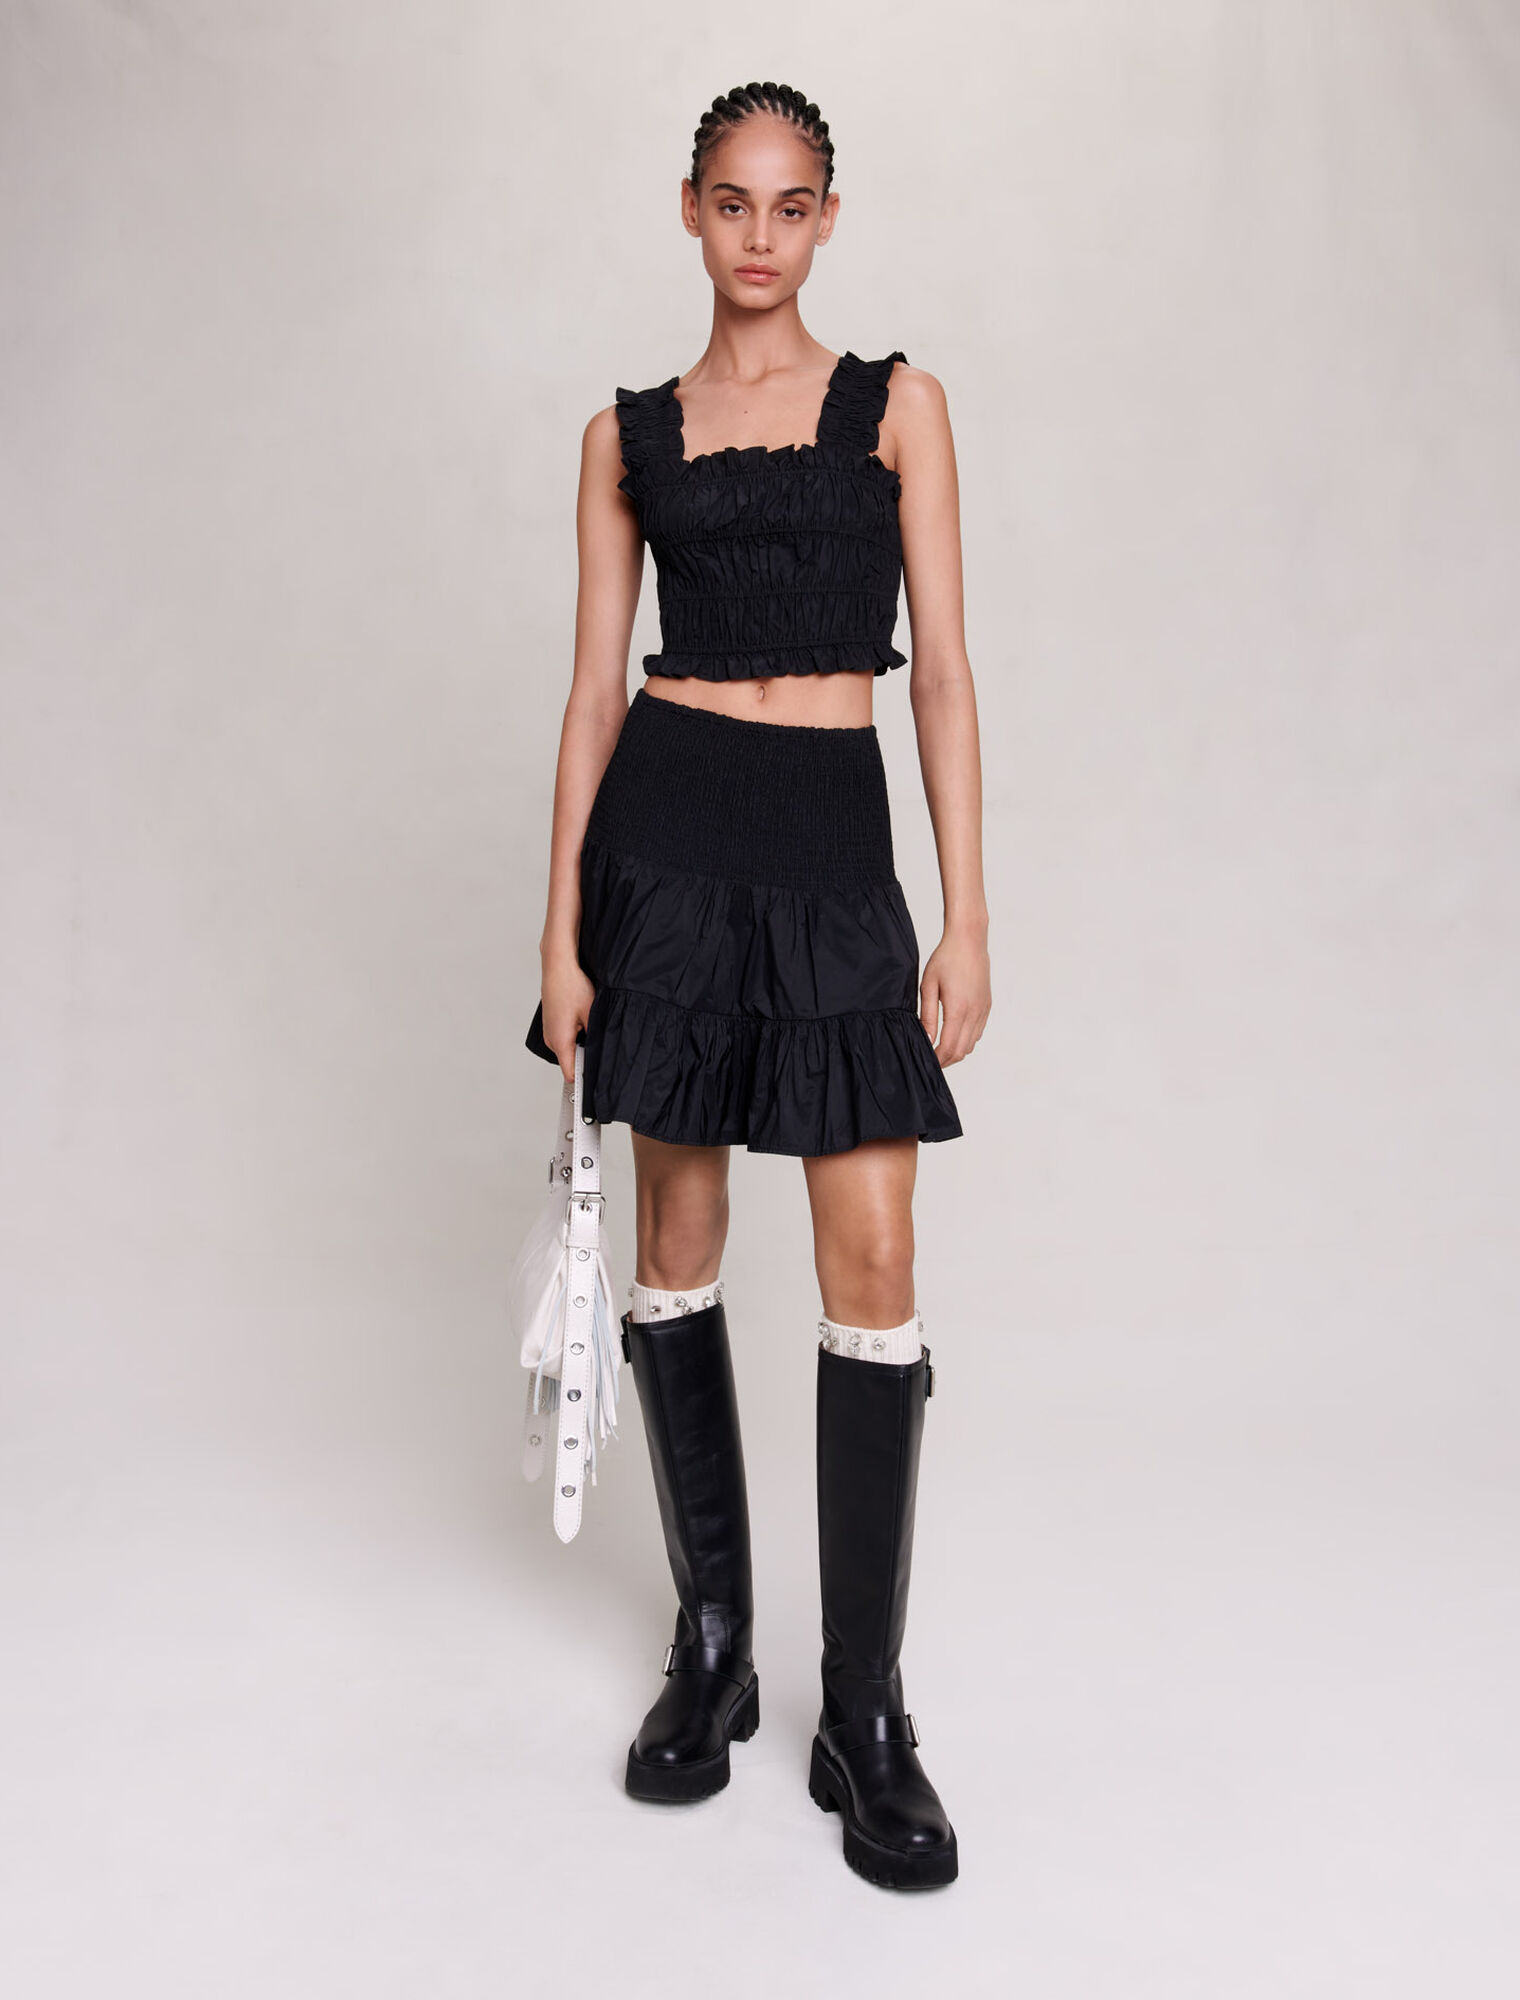 Short skirt with smocking and ruffles